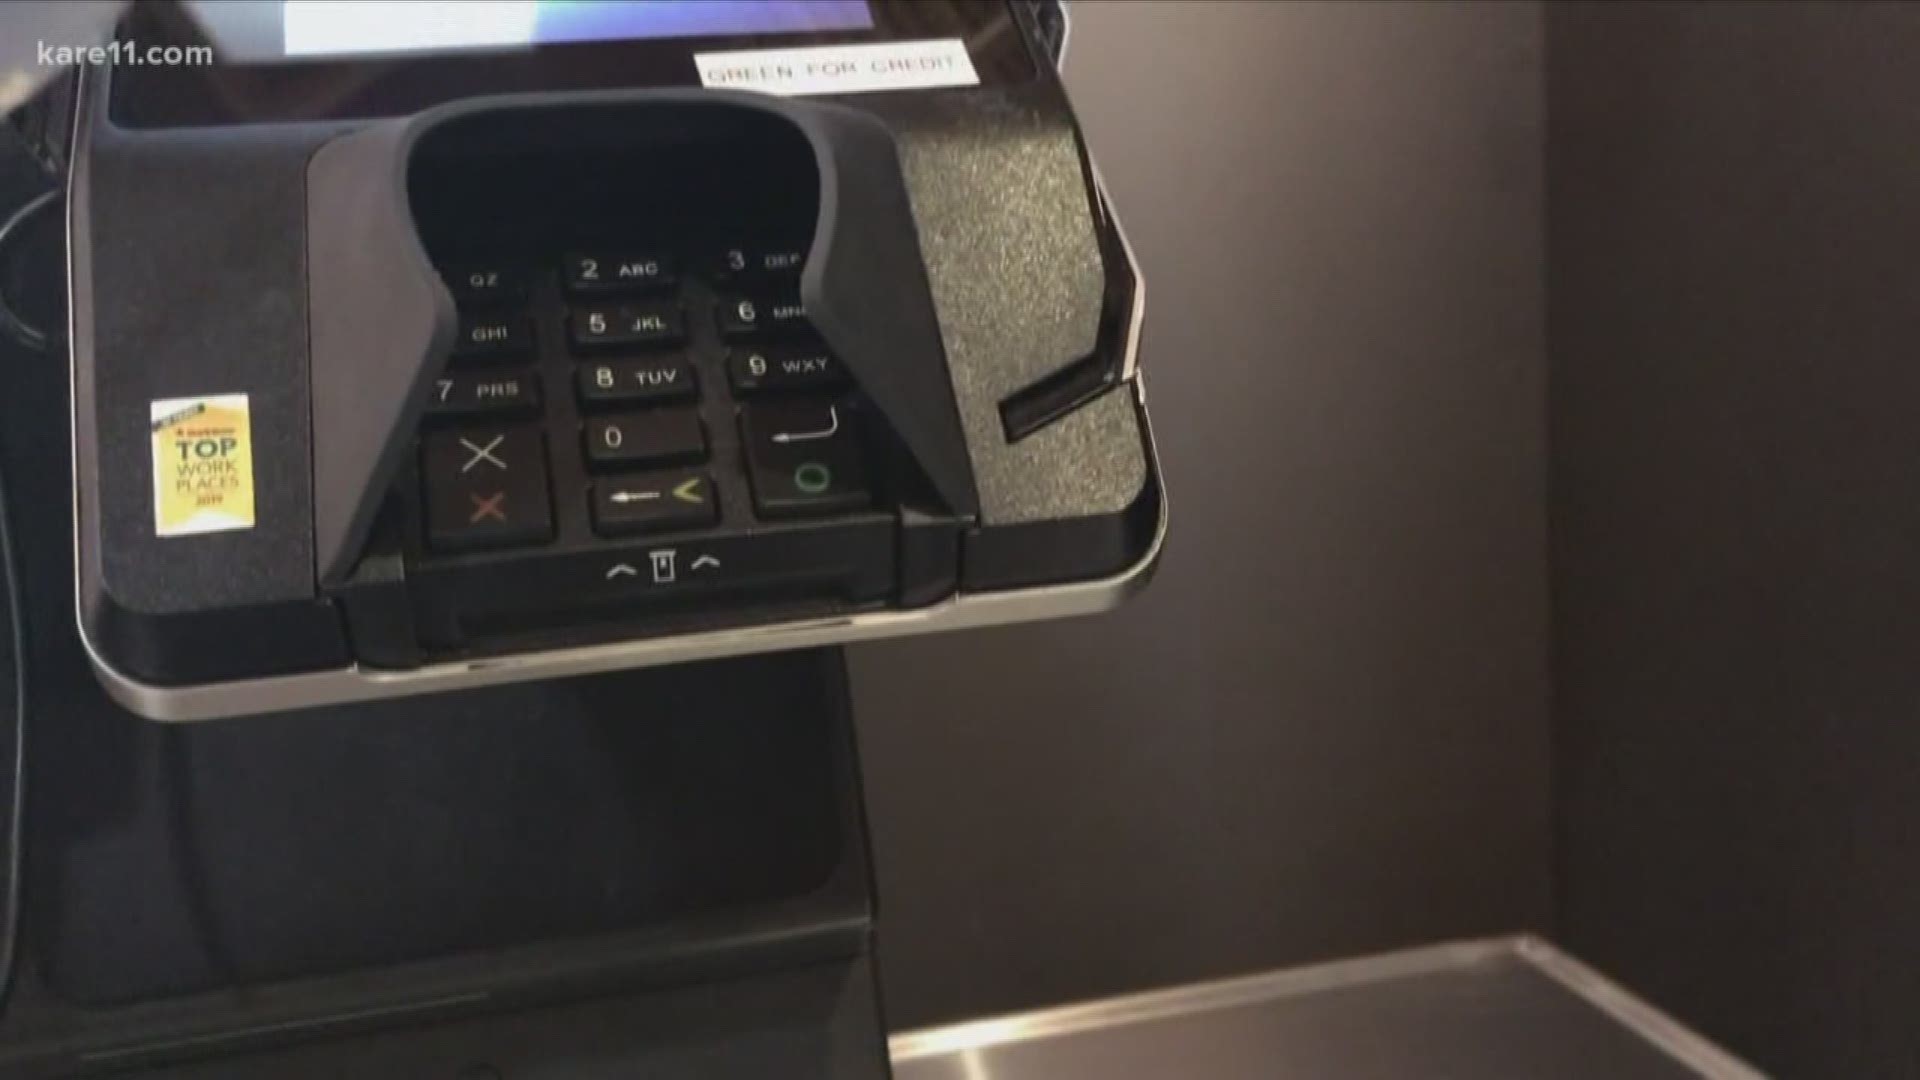 Although skimmers were found at four stores, Lunds believes only 10 customers were impacted.